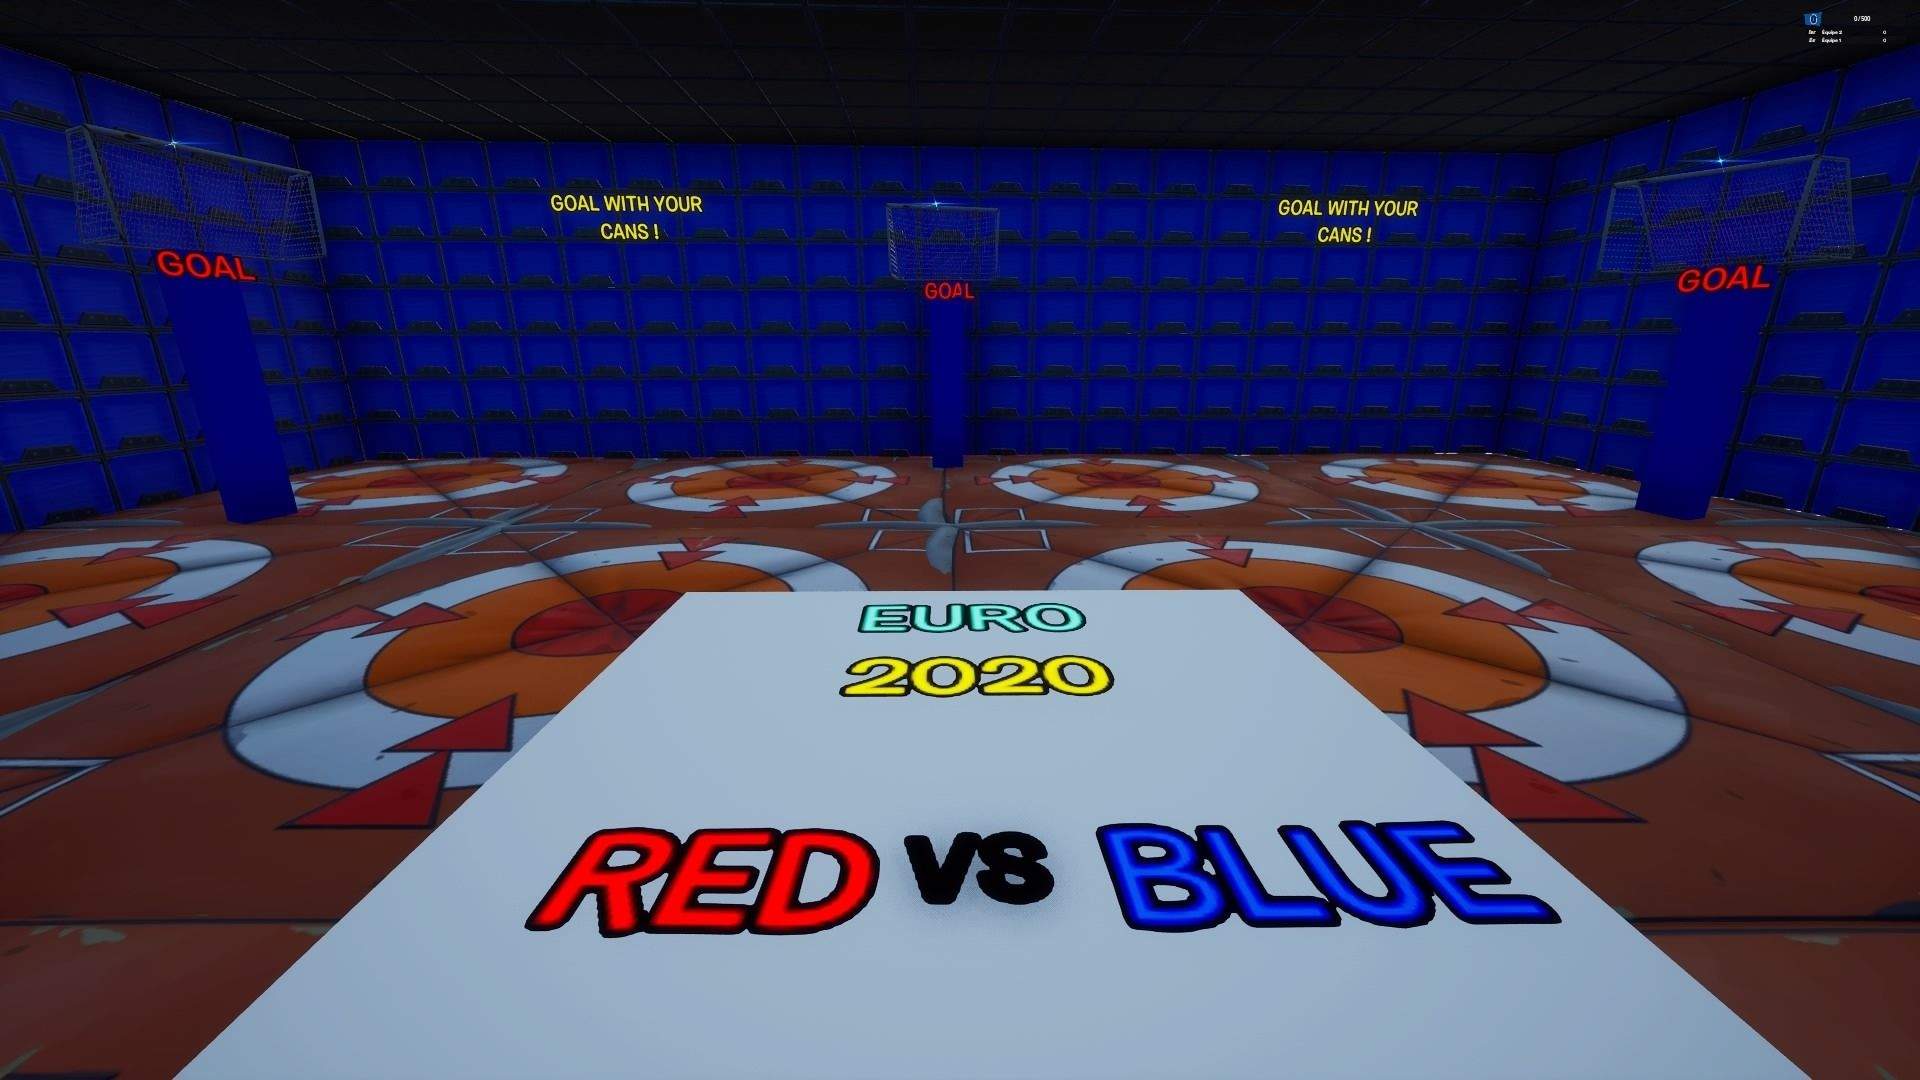 EURO 2020 RED VS BLUE